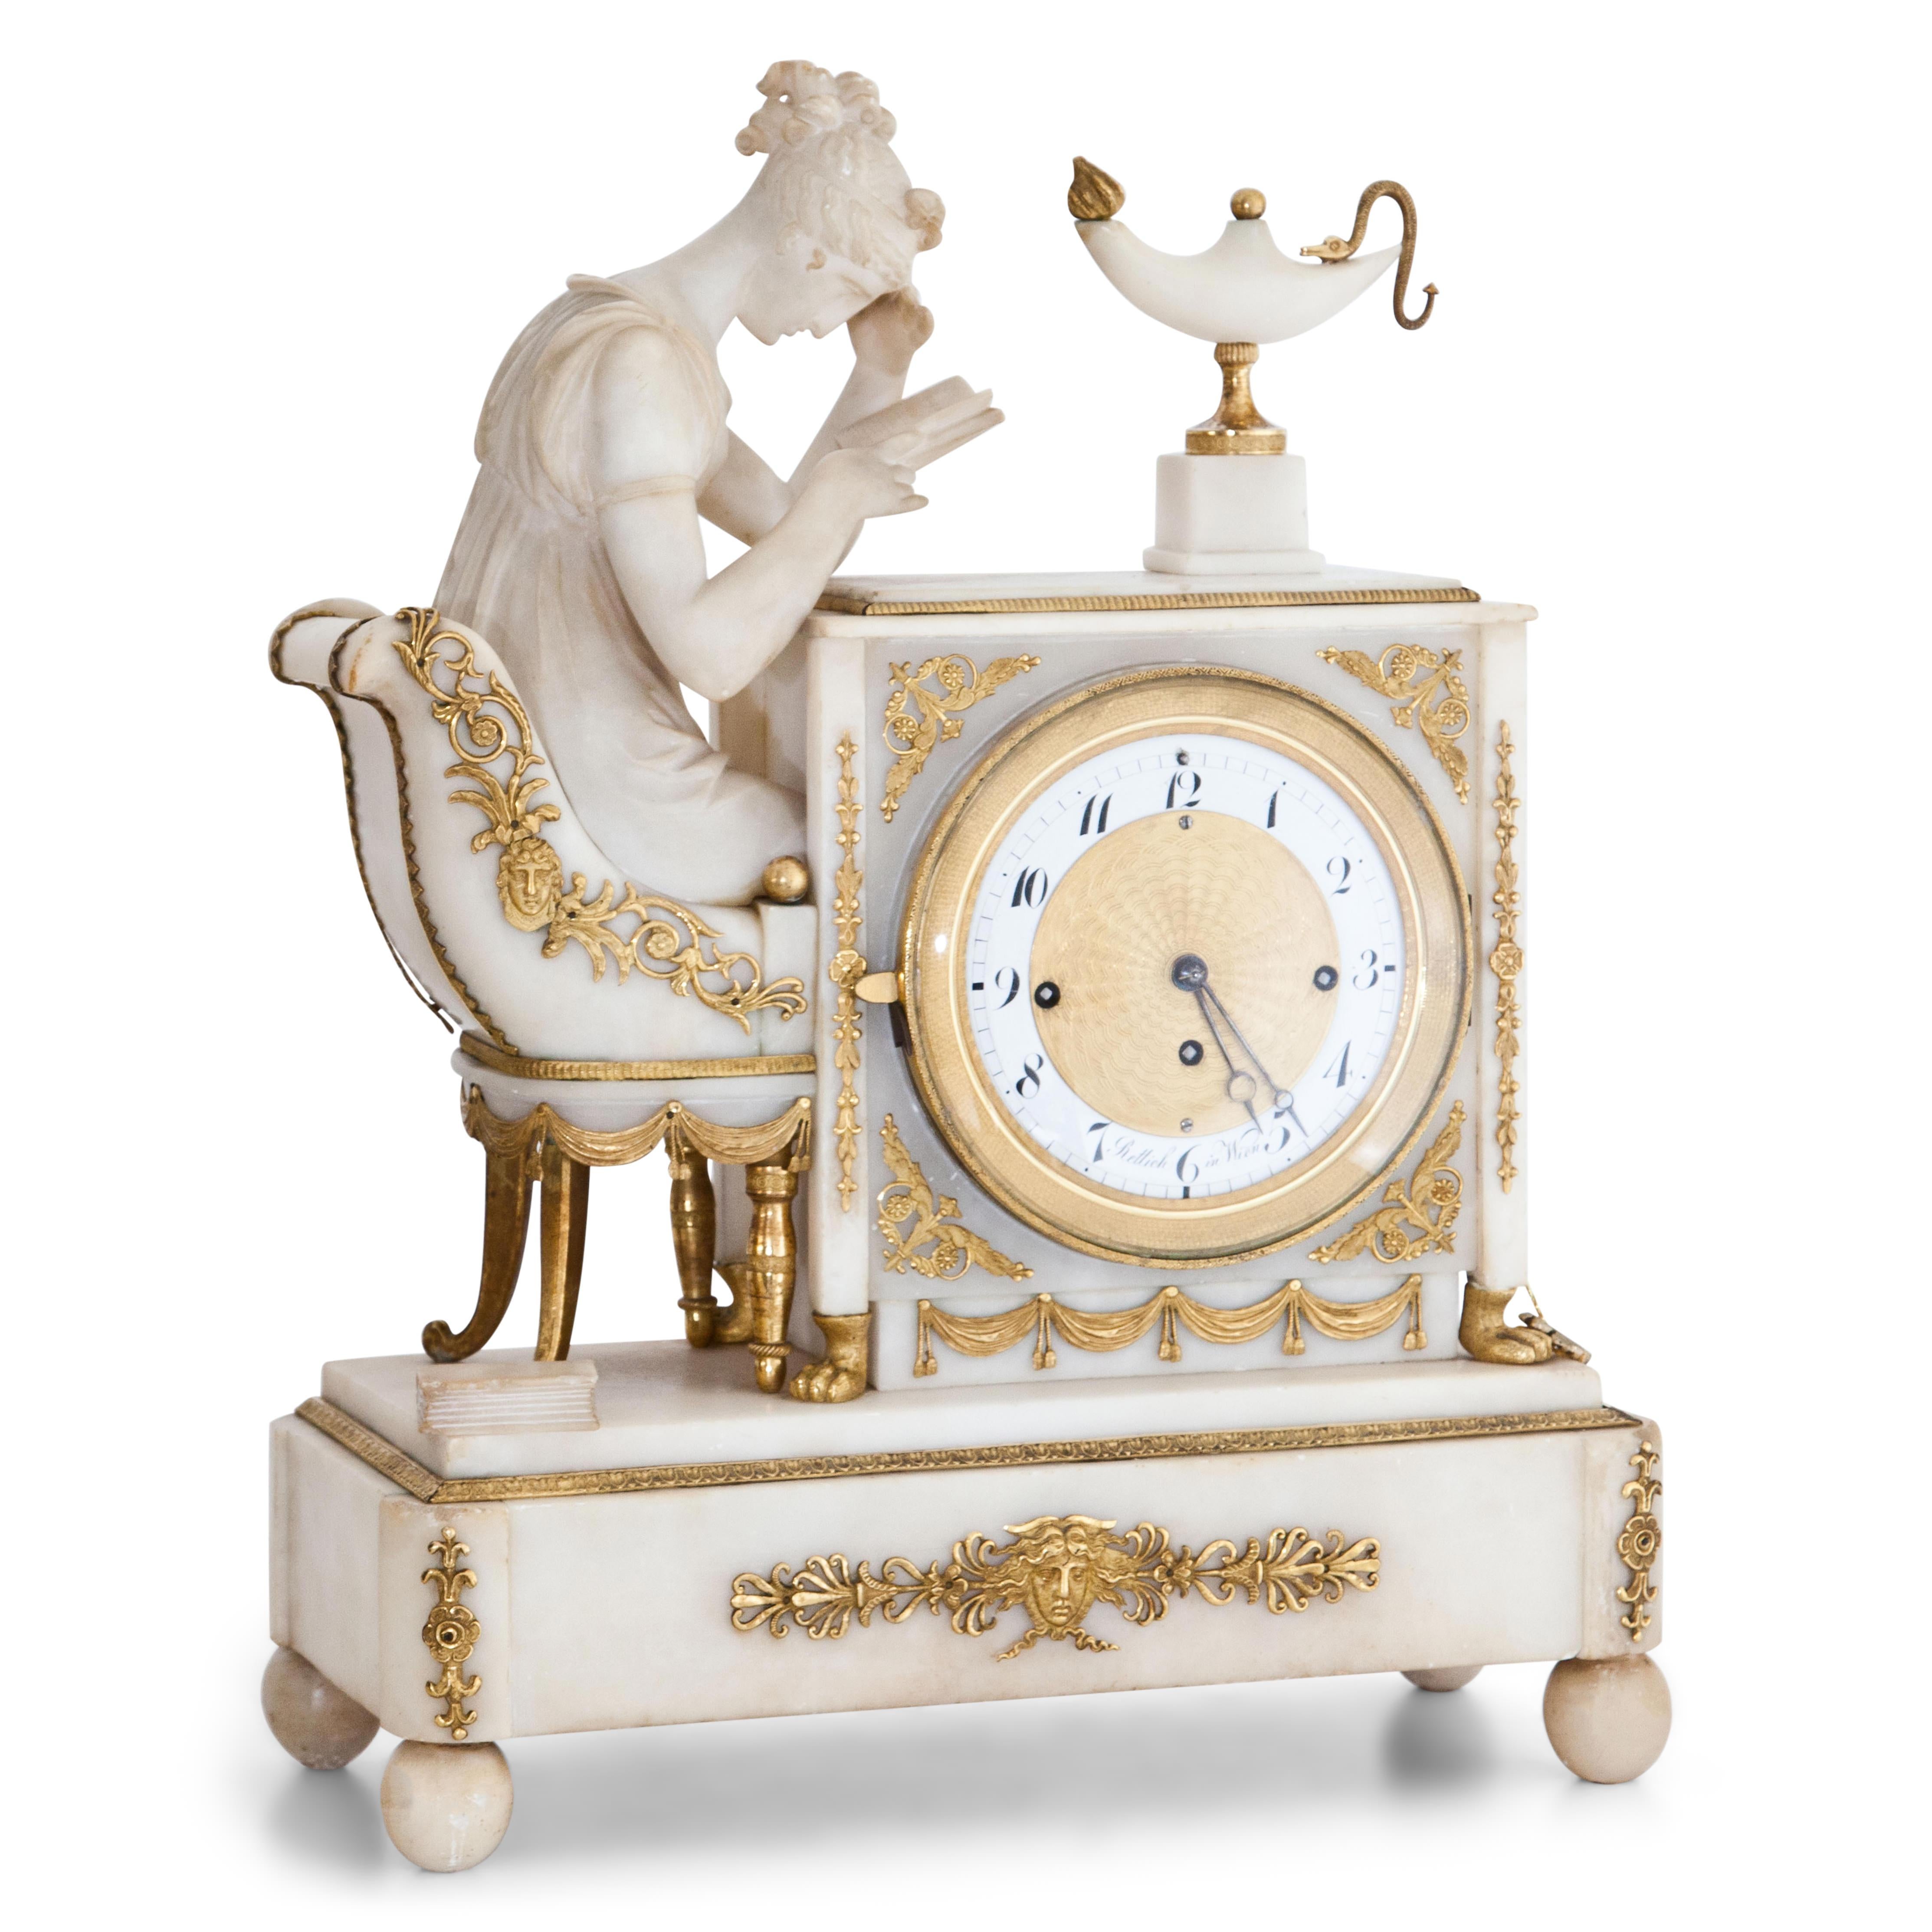 Alabaster Pendule clock standing on ball feet with fire-gilded bronze fittings. The rectangular base shows a figurative representation of young woman, reading in the light of an oil lamp. Inscriped in the open book 